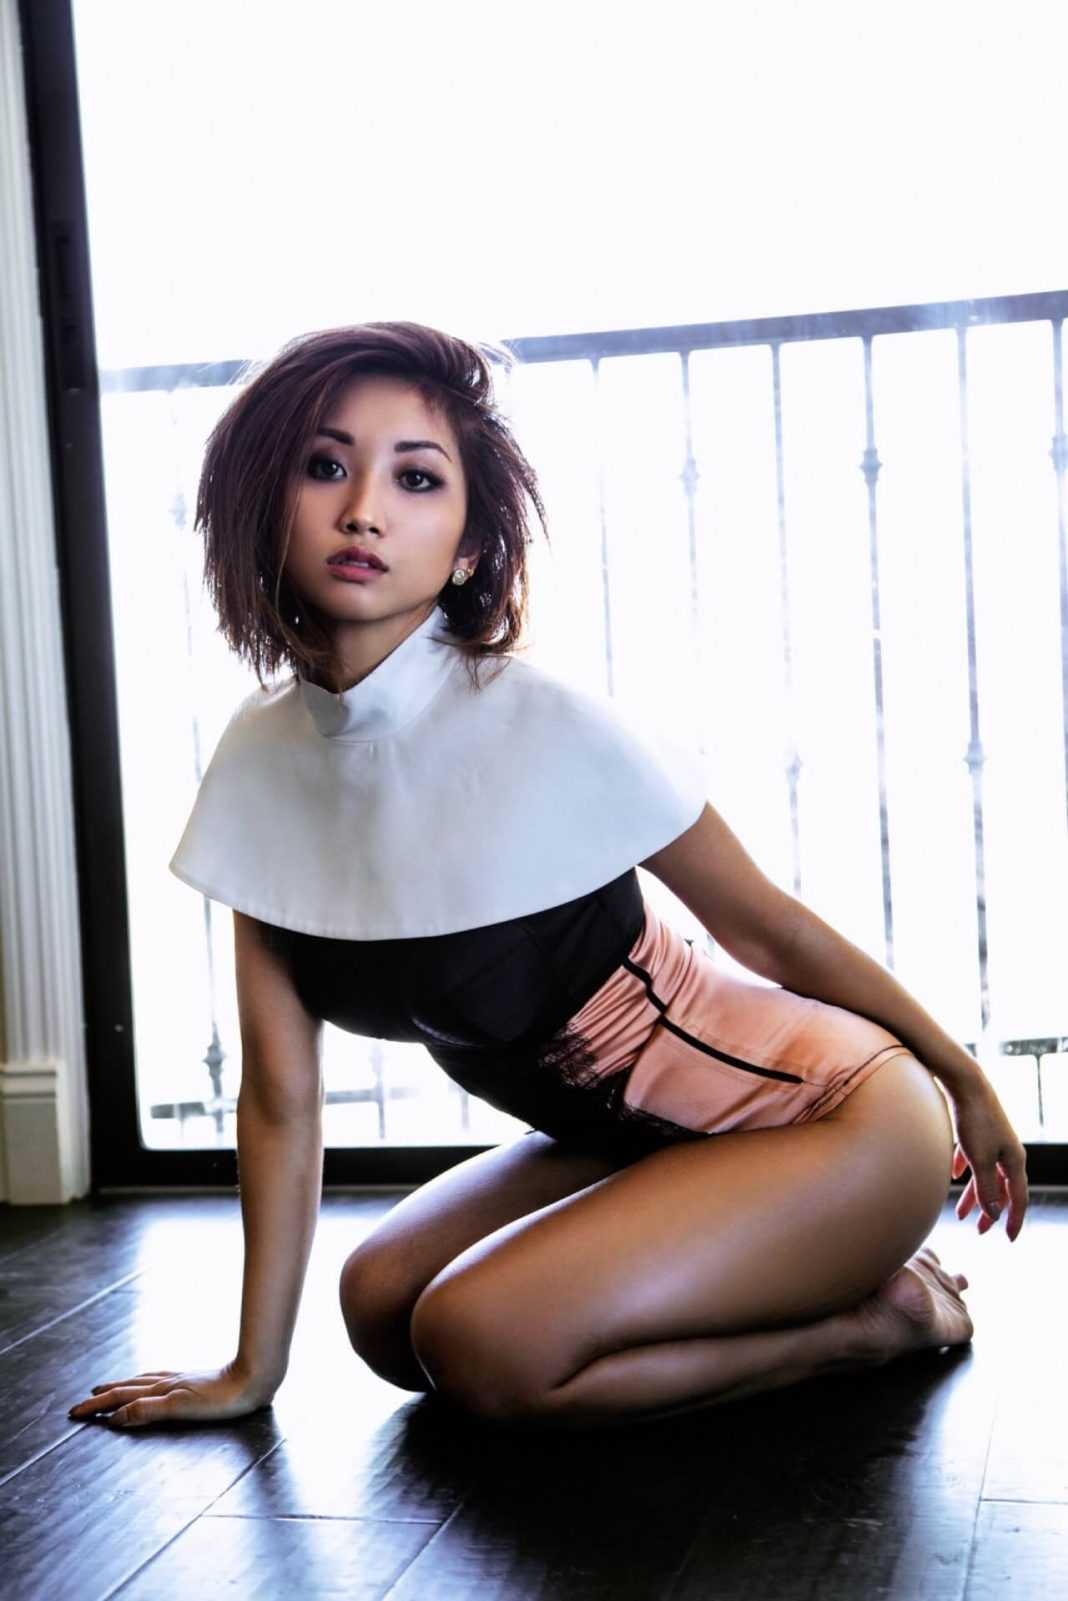 49 Hottest Brenda Song Bikini Pictures Will Make You Crave For Her | Best Of Comic Books